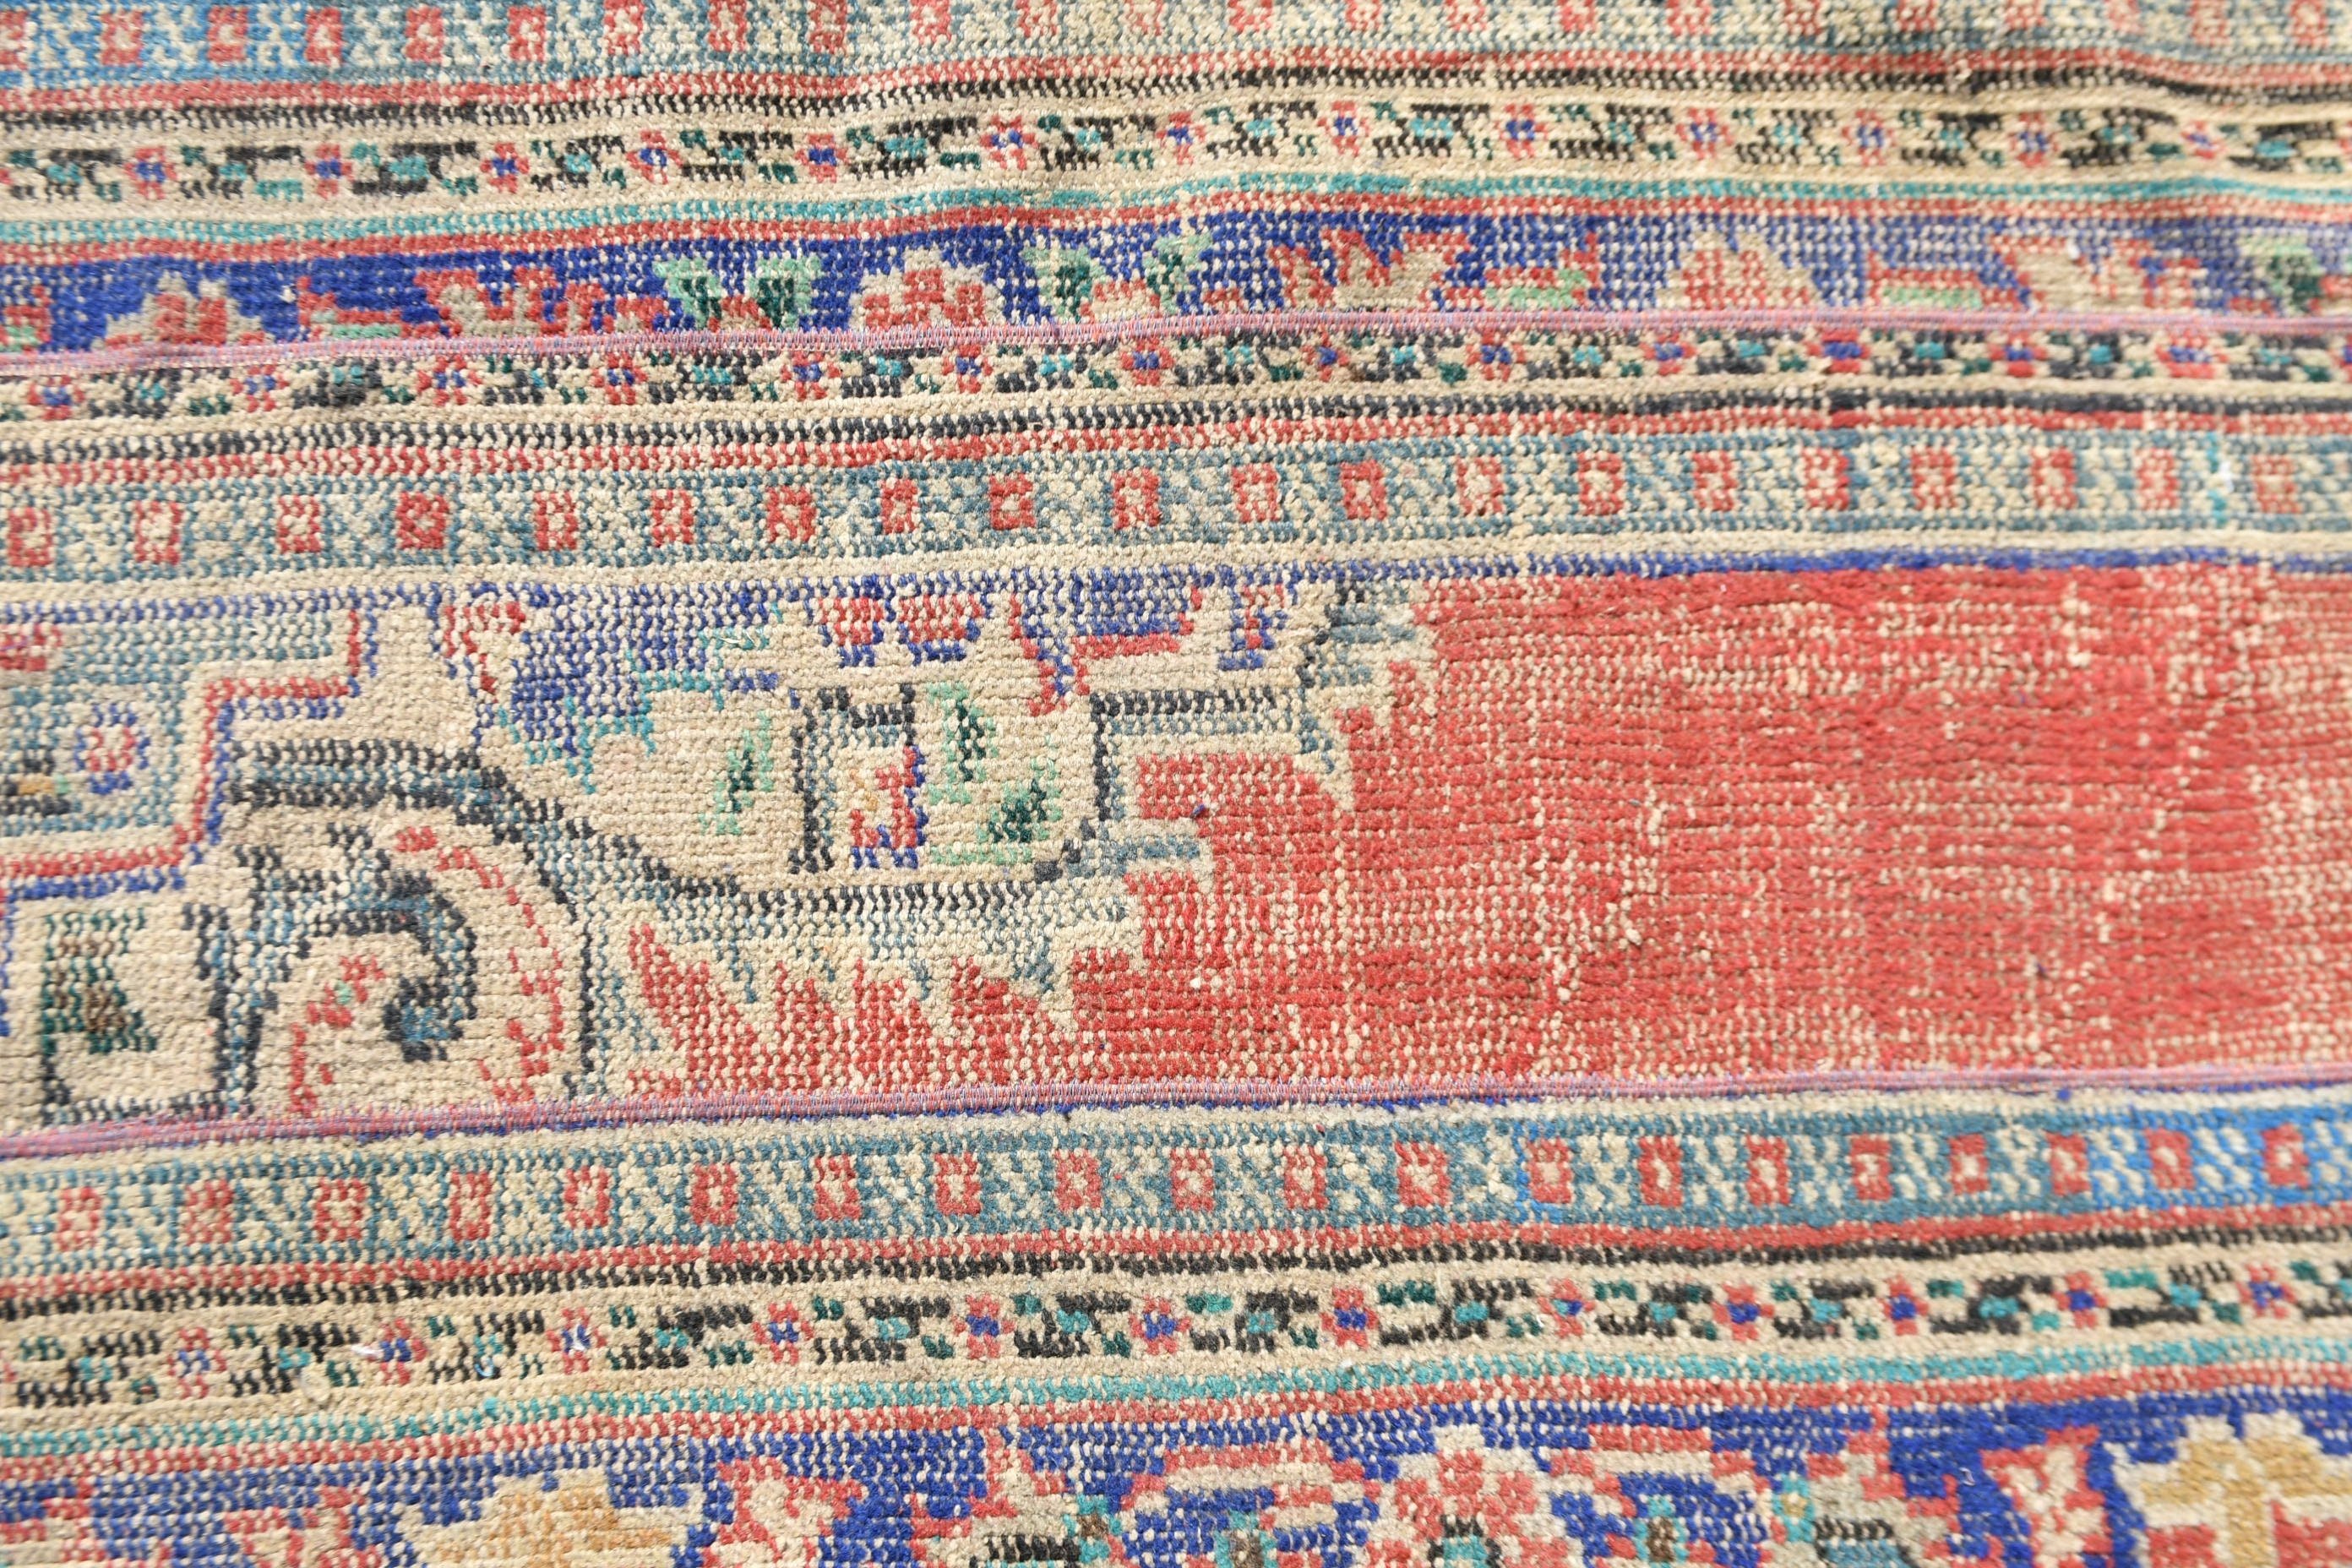 Turkish Rug, Bedroom Rugs, Kitchen Rug, Rugs for Car Mat, Anatolian Rug, Vintage Rugs, Ethnic Rug, 2.1x4.2 ft Small Rug, Blue Oriental Rugs